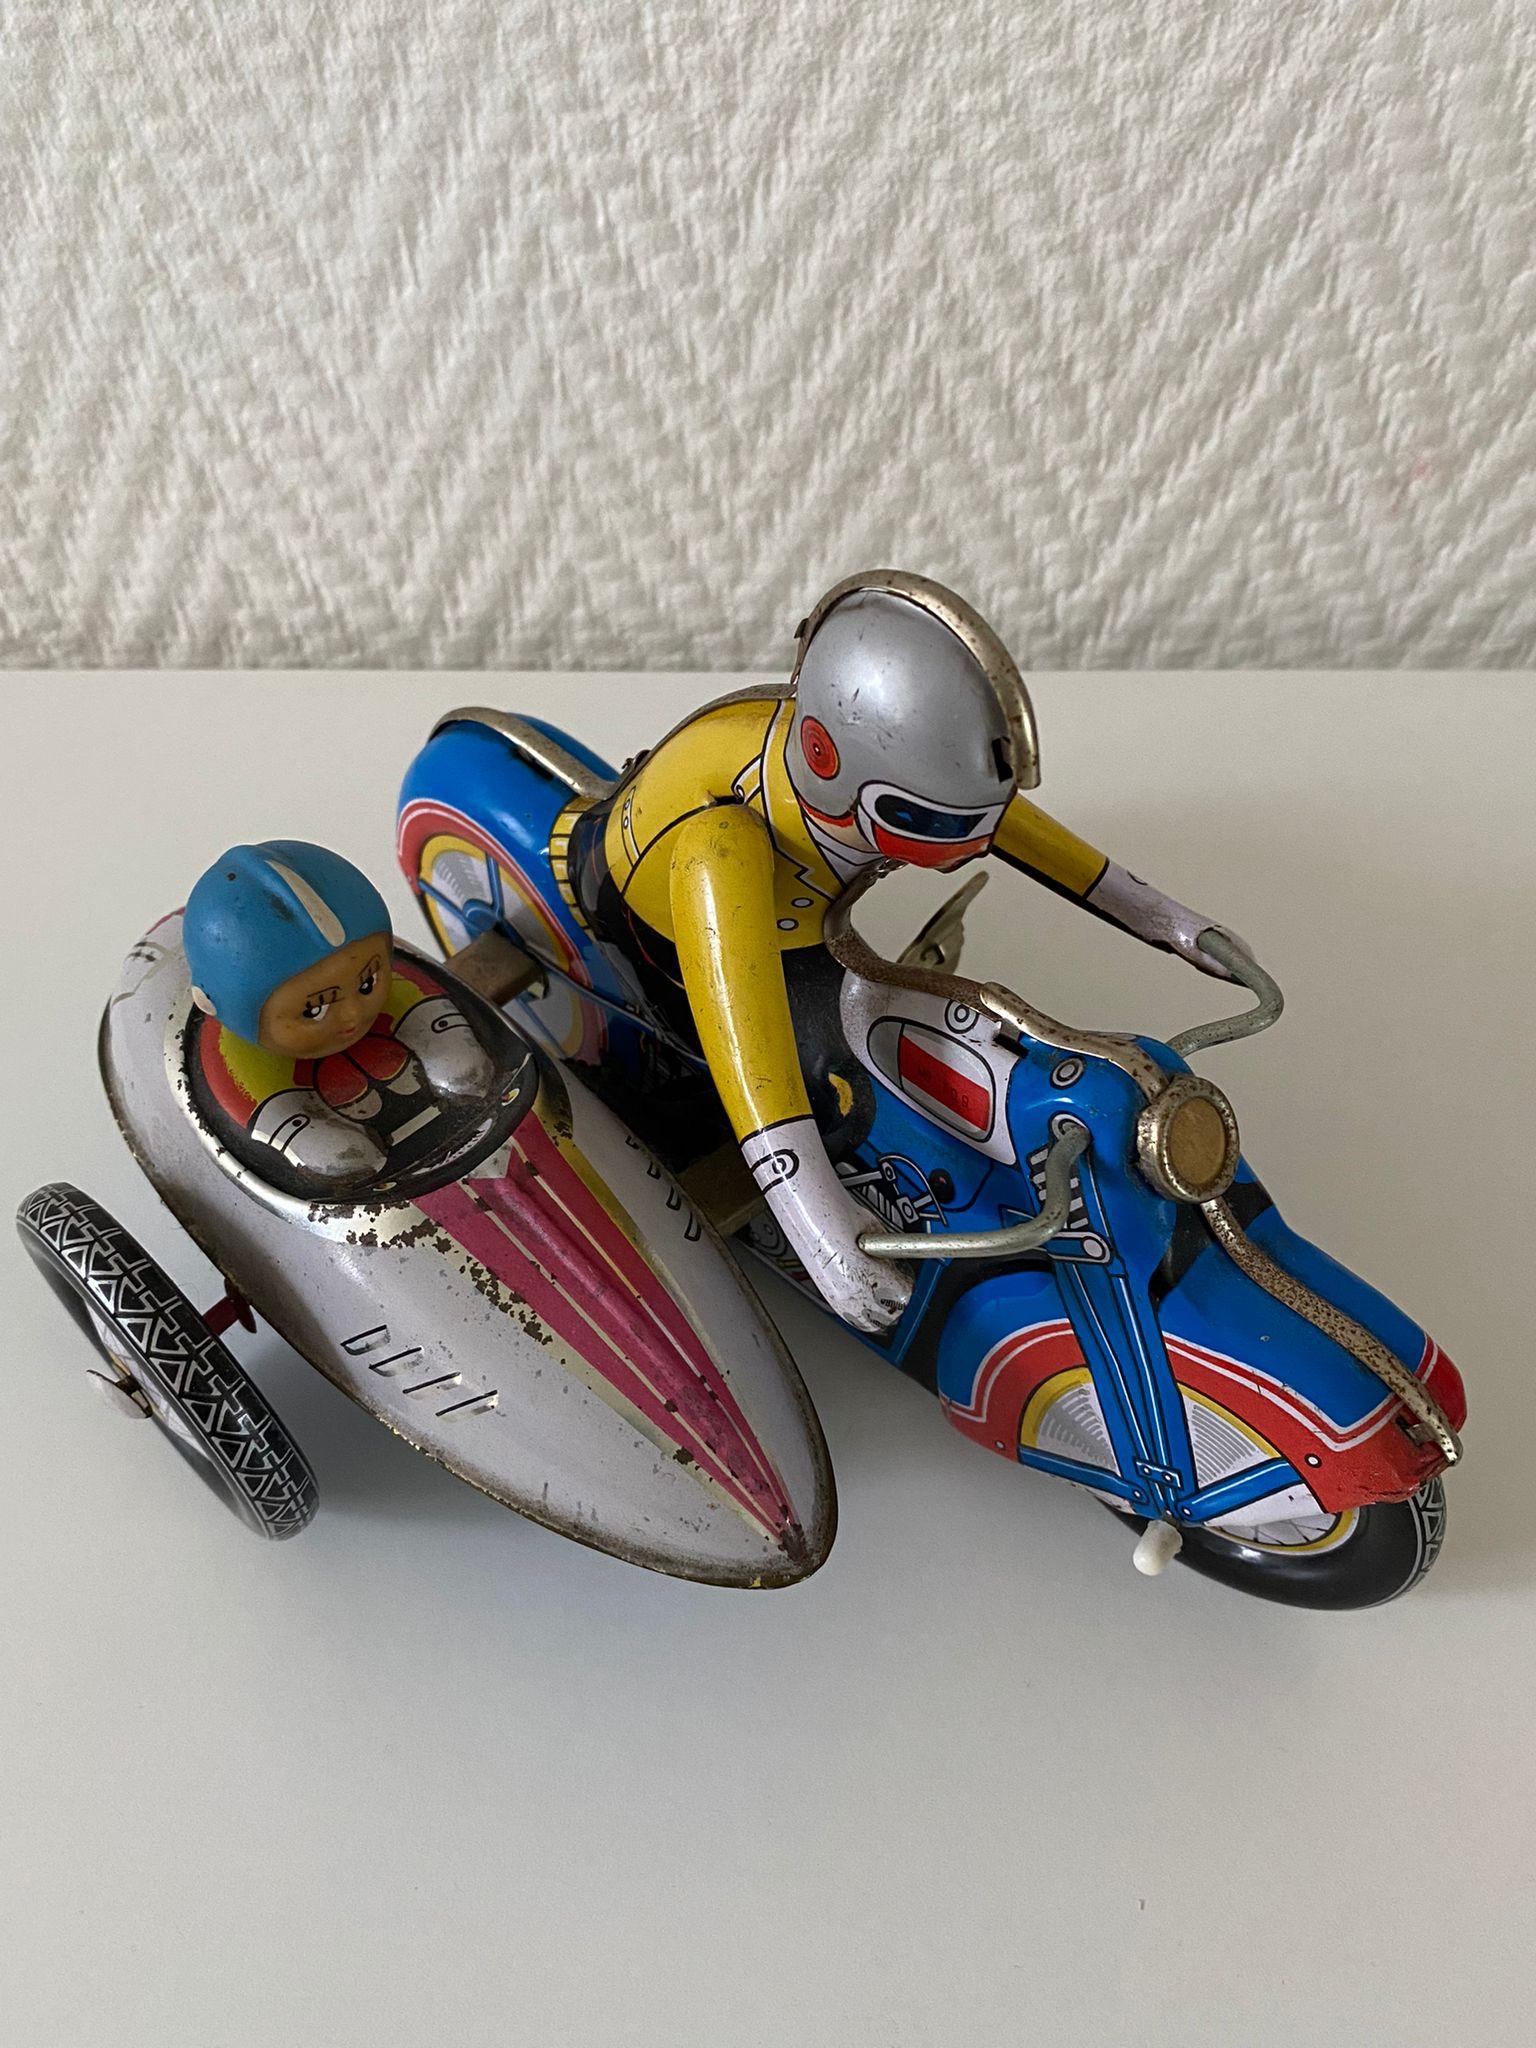 Vintage Wind-up Tin Toy Motorcycle with Co-driver and key.
The piece comes from ca. the 1950s and remains in good condition for it’s age. Normal wear.
Number: 605.